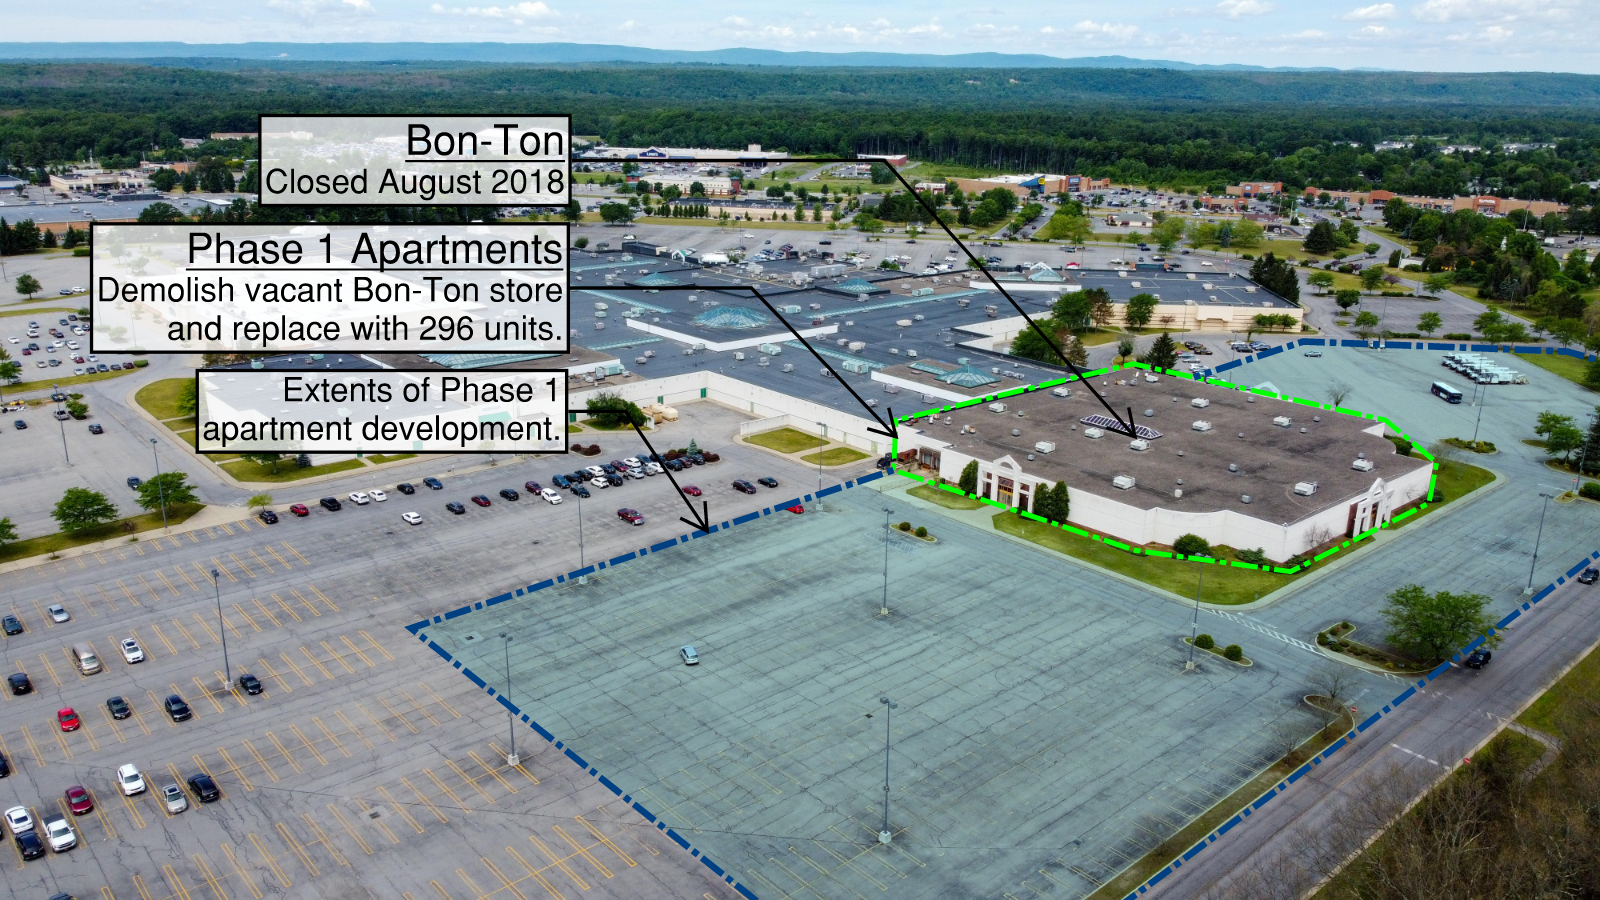 Wilton Mall overhead view with notes on construction plan